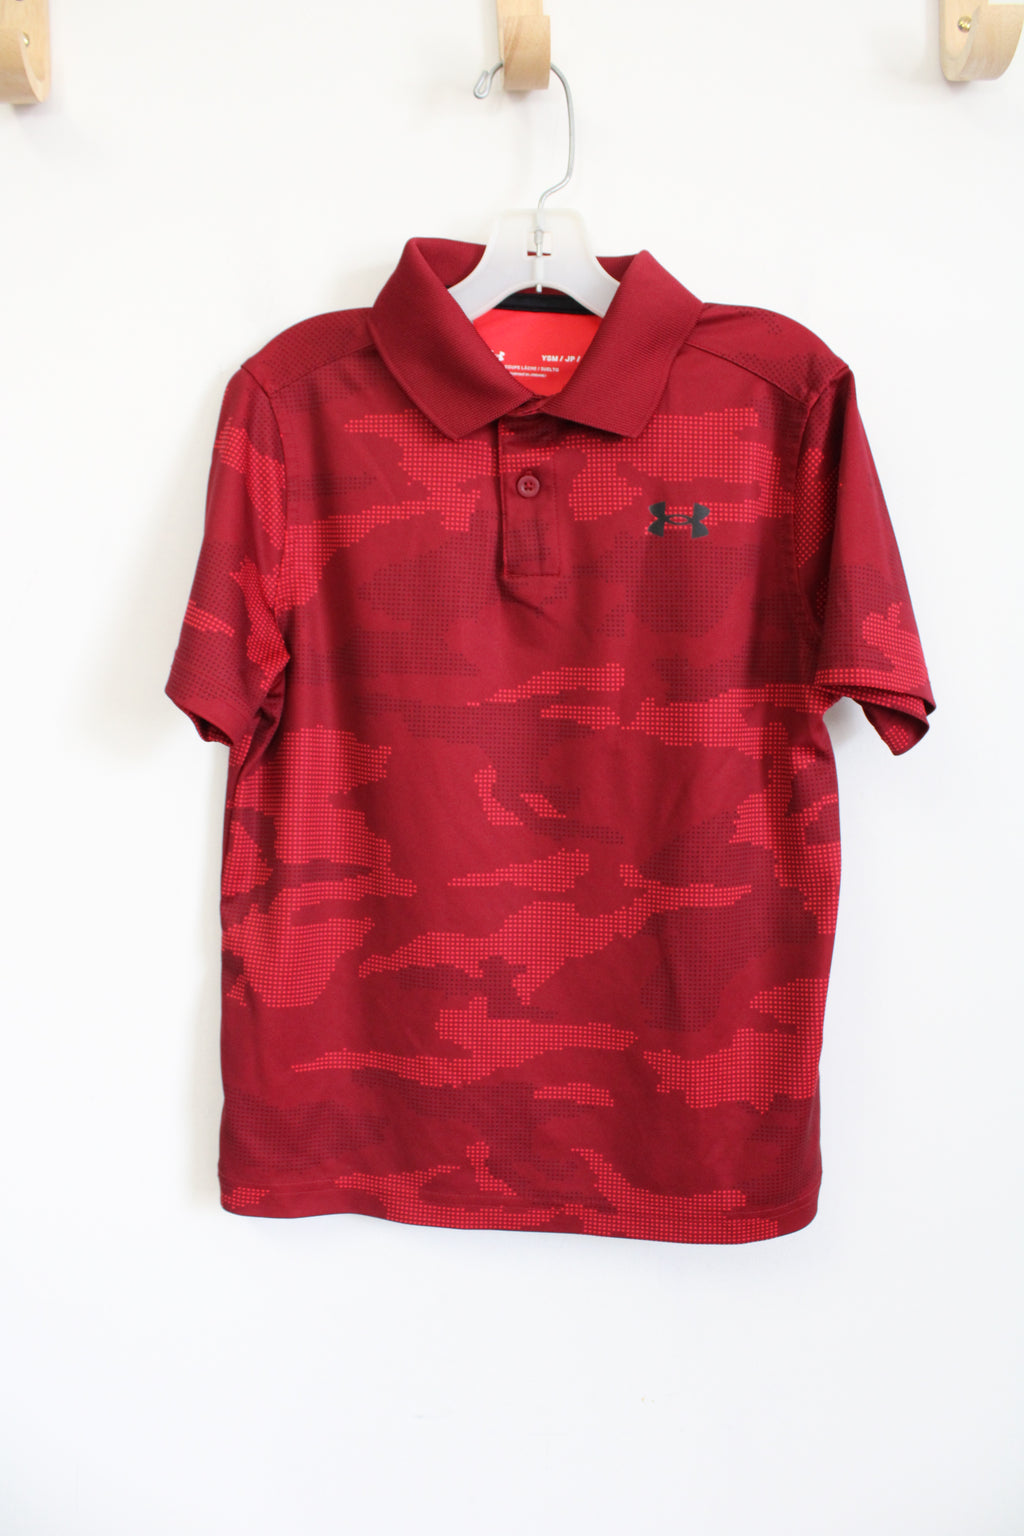 Under Armour Loose Fit Red Polo Shirt | Youth S (8)